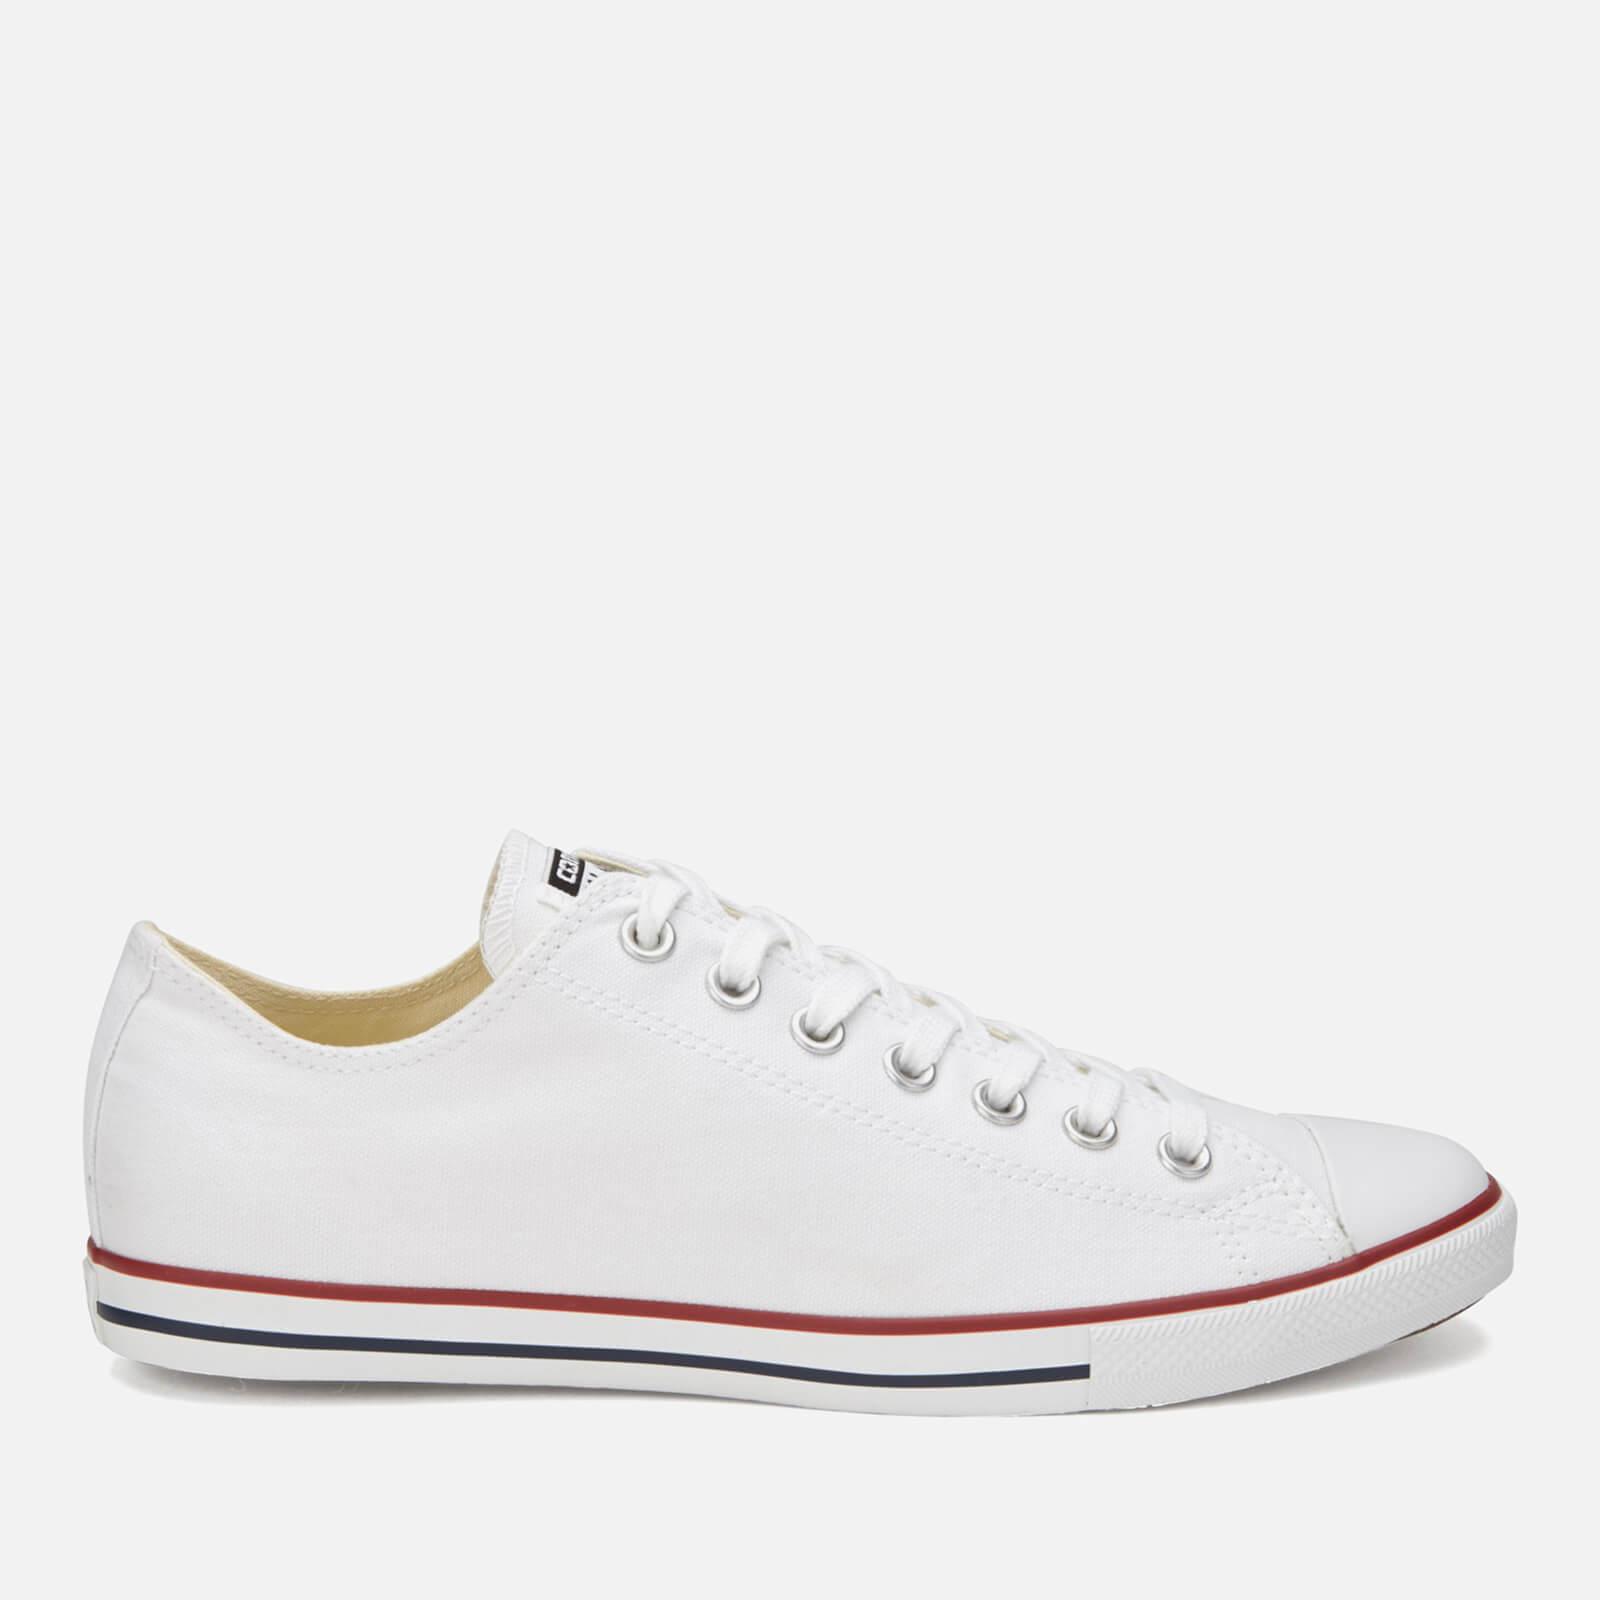 converse all star ox lean unisex trainers